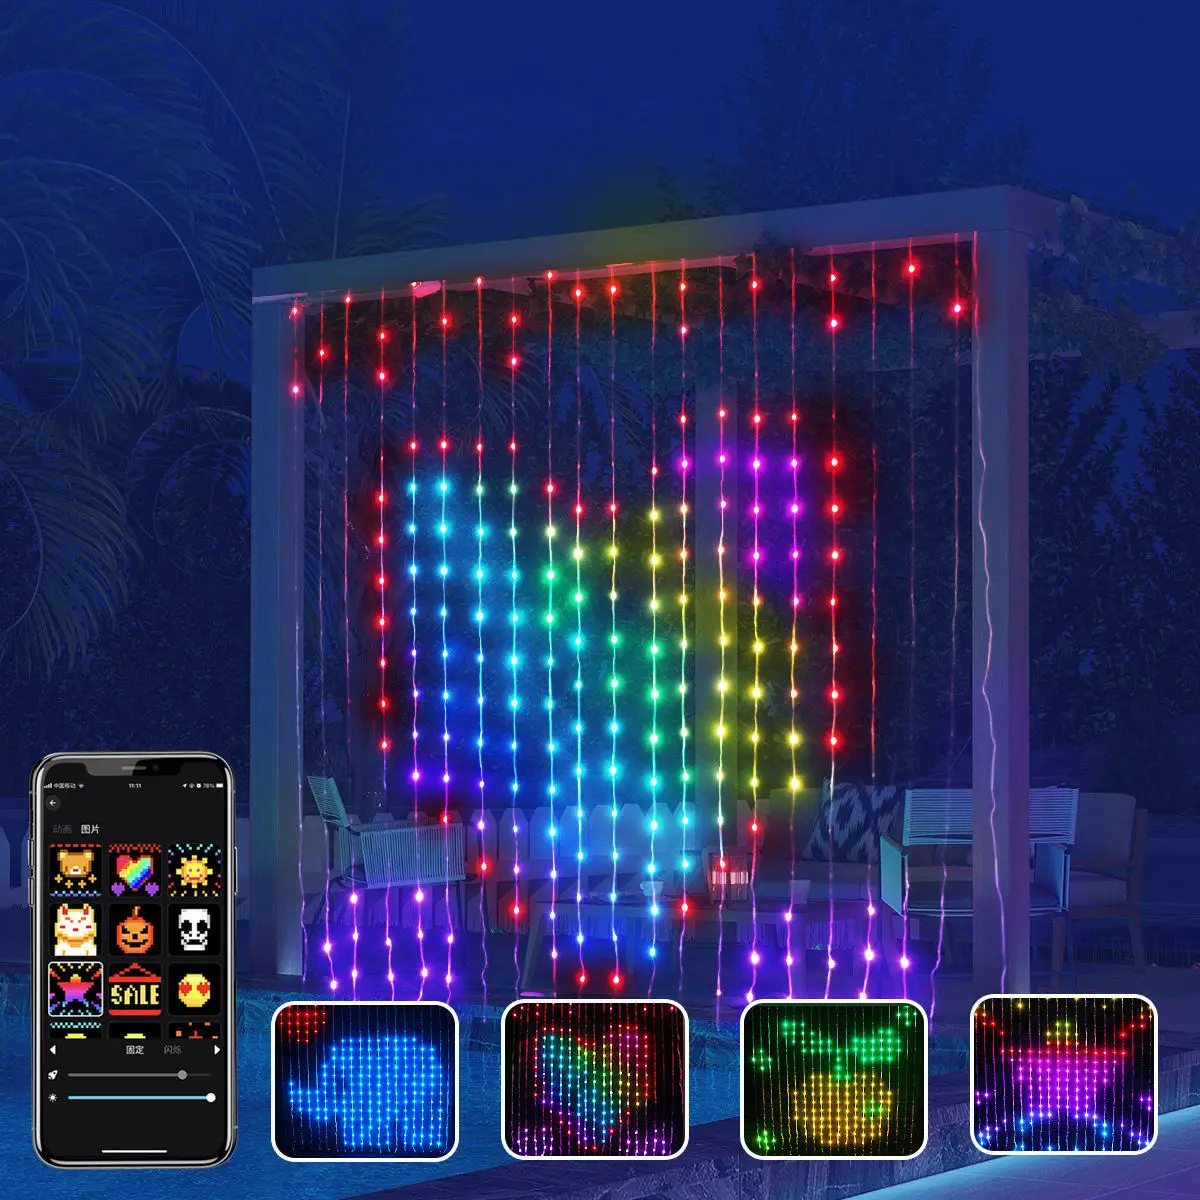 programmable-colorful-smart-led-window-hanging-curtain-string-lights-bluetooth-app-control-for-mall-bedroom-wedding-christmas